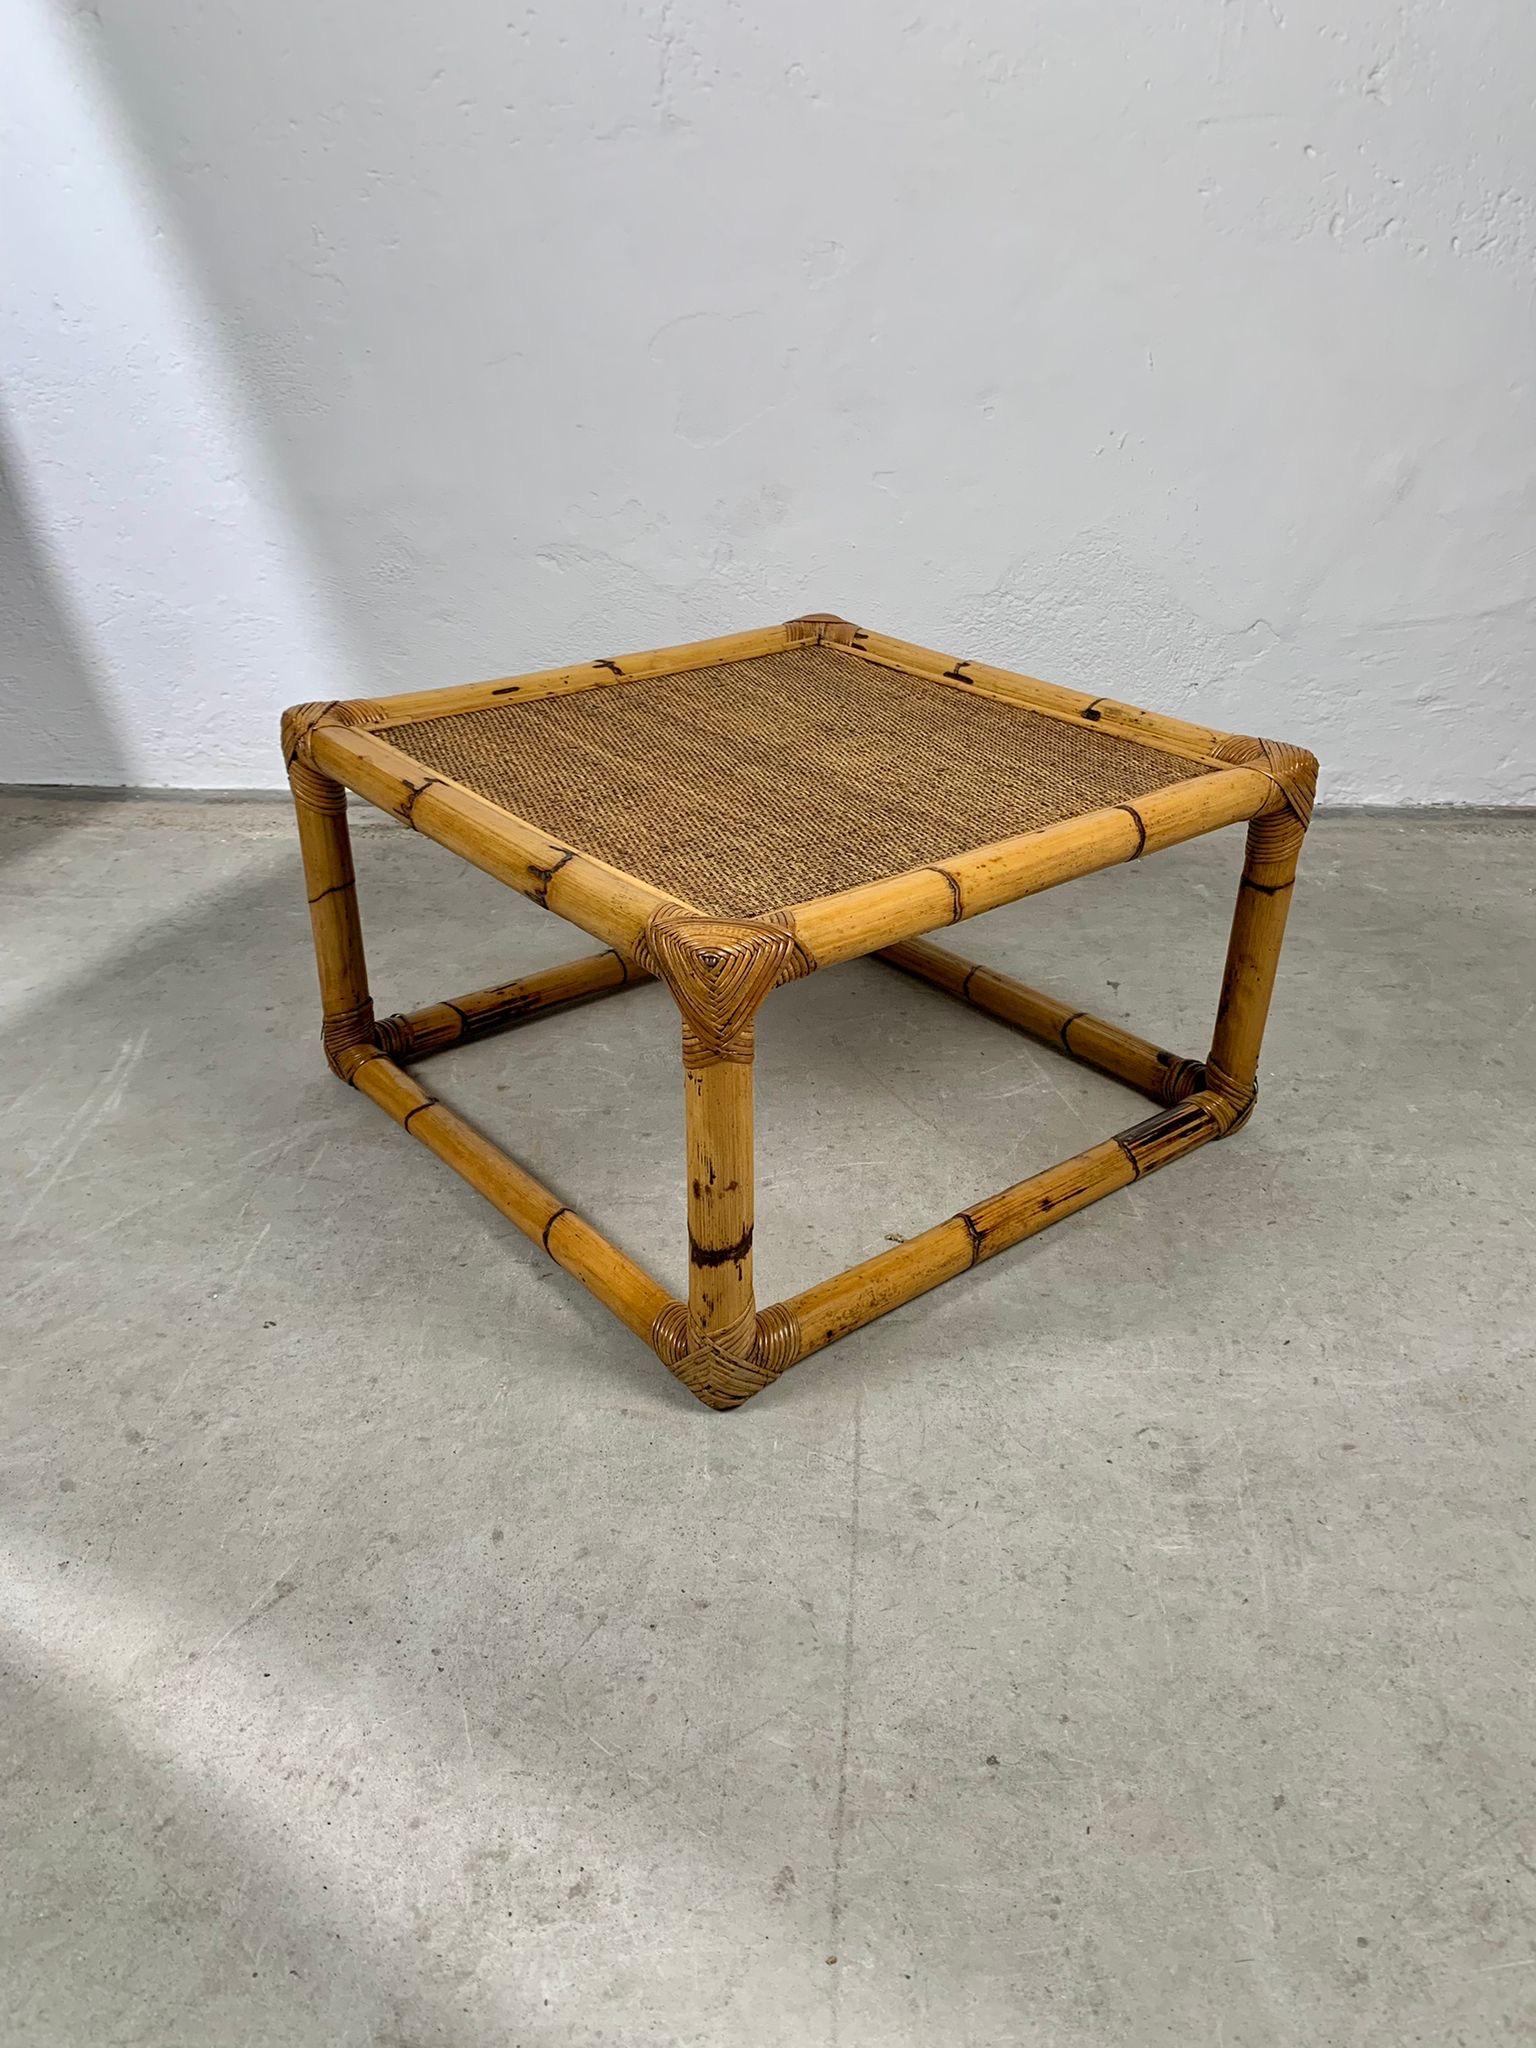 Low bamboo and rattan coffee table by Vivai del Sud, Italy, 1970s

Low bamboo and rattan coffee table produced by the famous company Vivai del Sud in the 1970s

Excellent condition

Measurements 70 x 70 x 40h cm 

